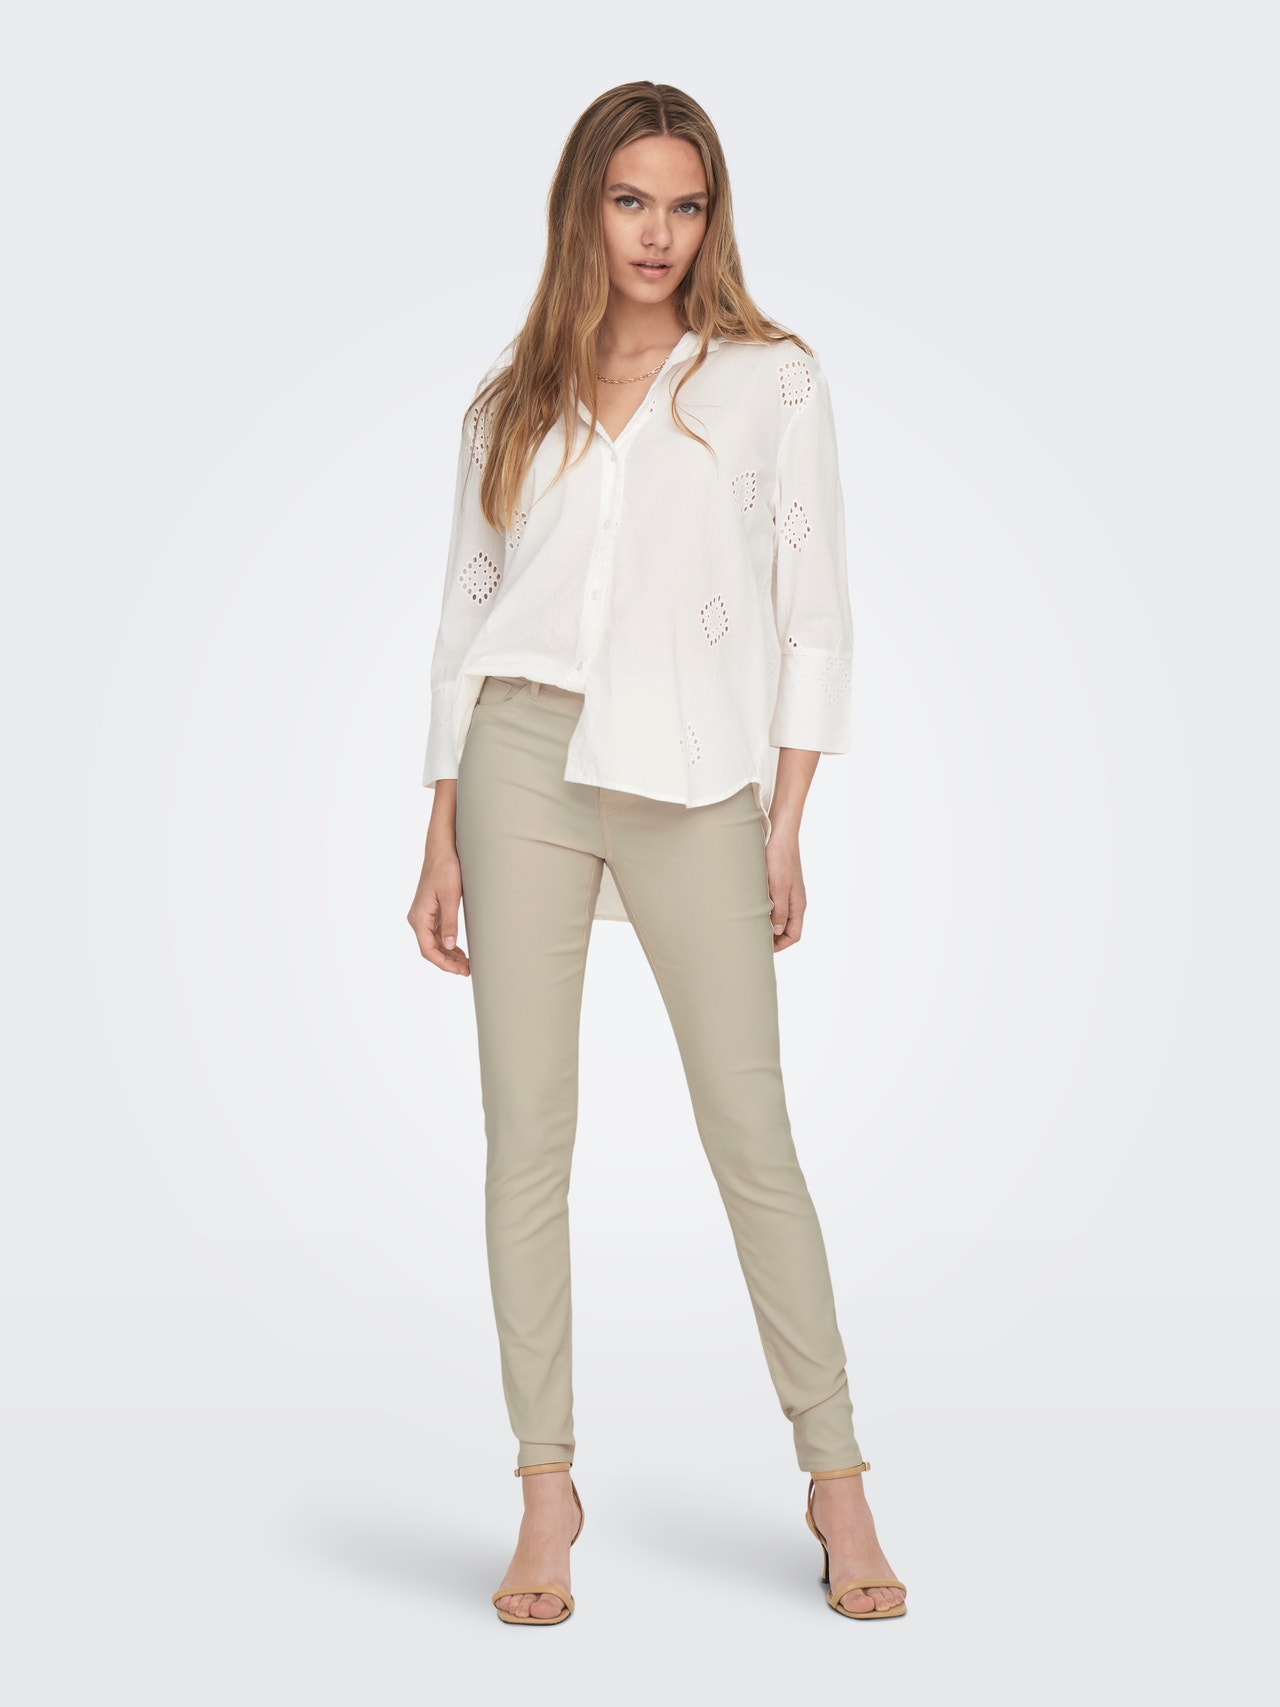 ONLY Skinny trousers with mid waist -Sandshell - 15291267